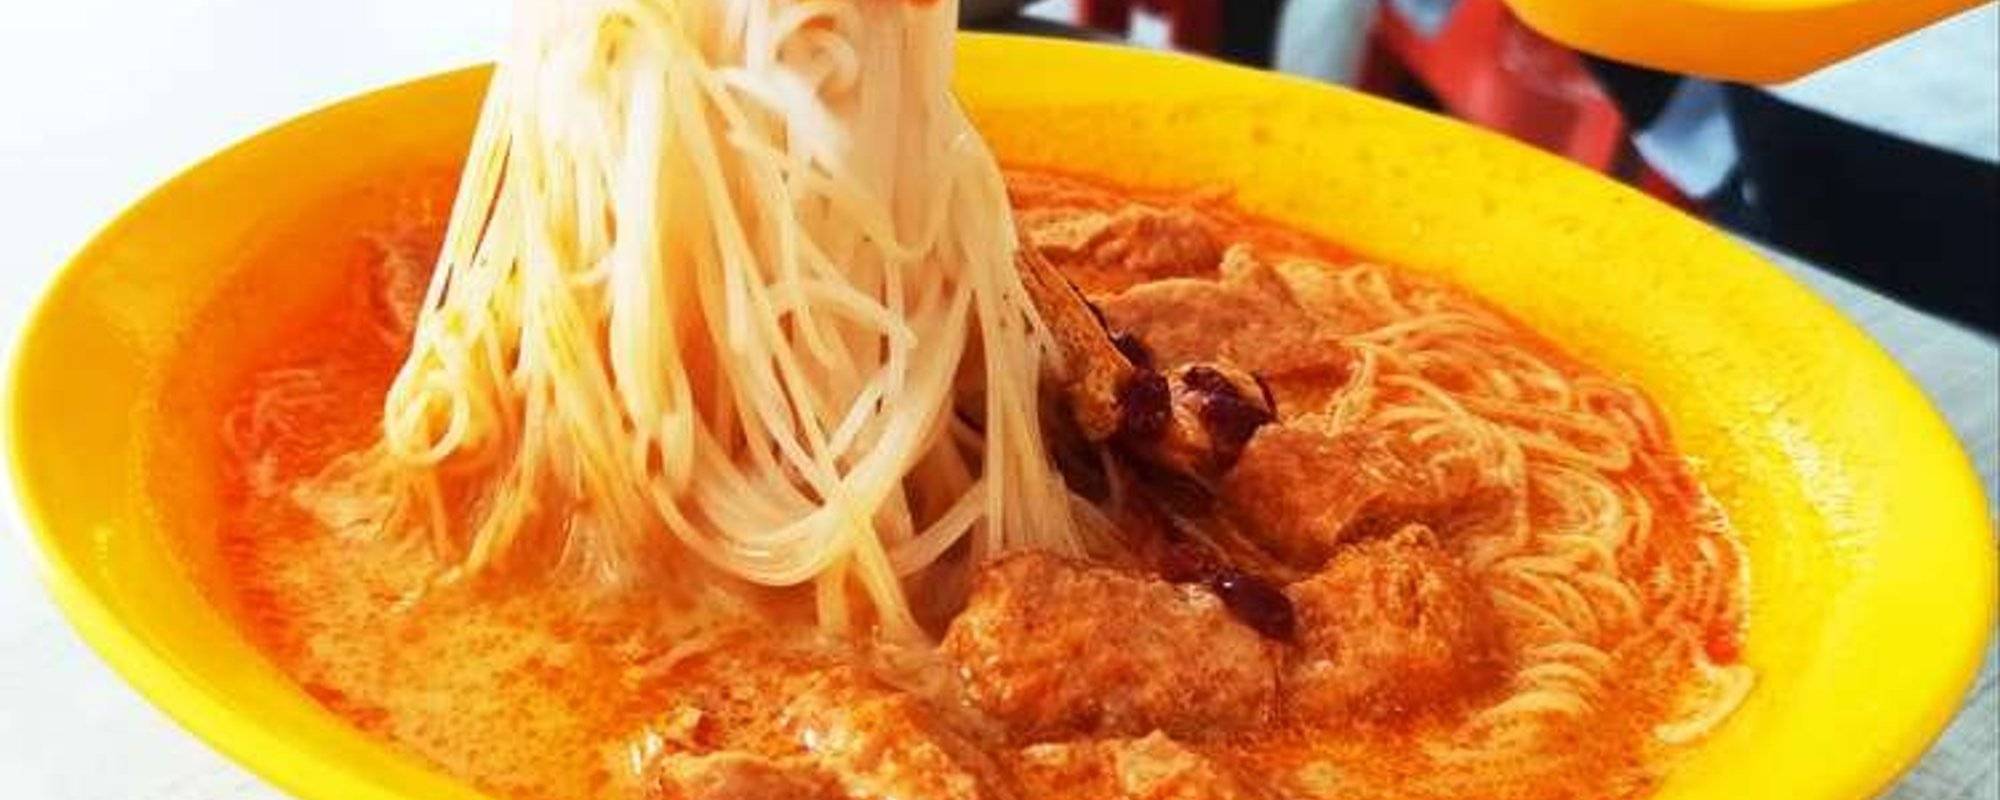 HOT AND SPICY VEGETARIAN LAKSA BREAKFAST 热辣辣的素叻沙